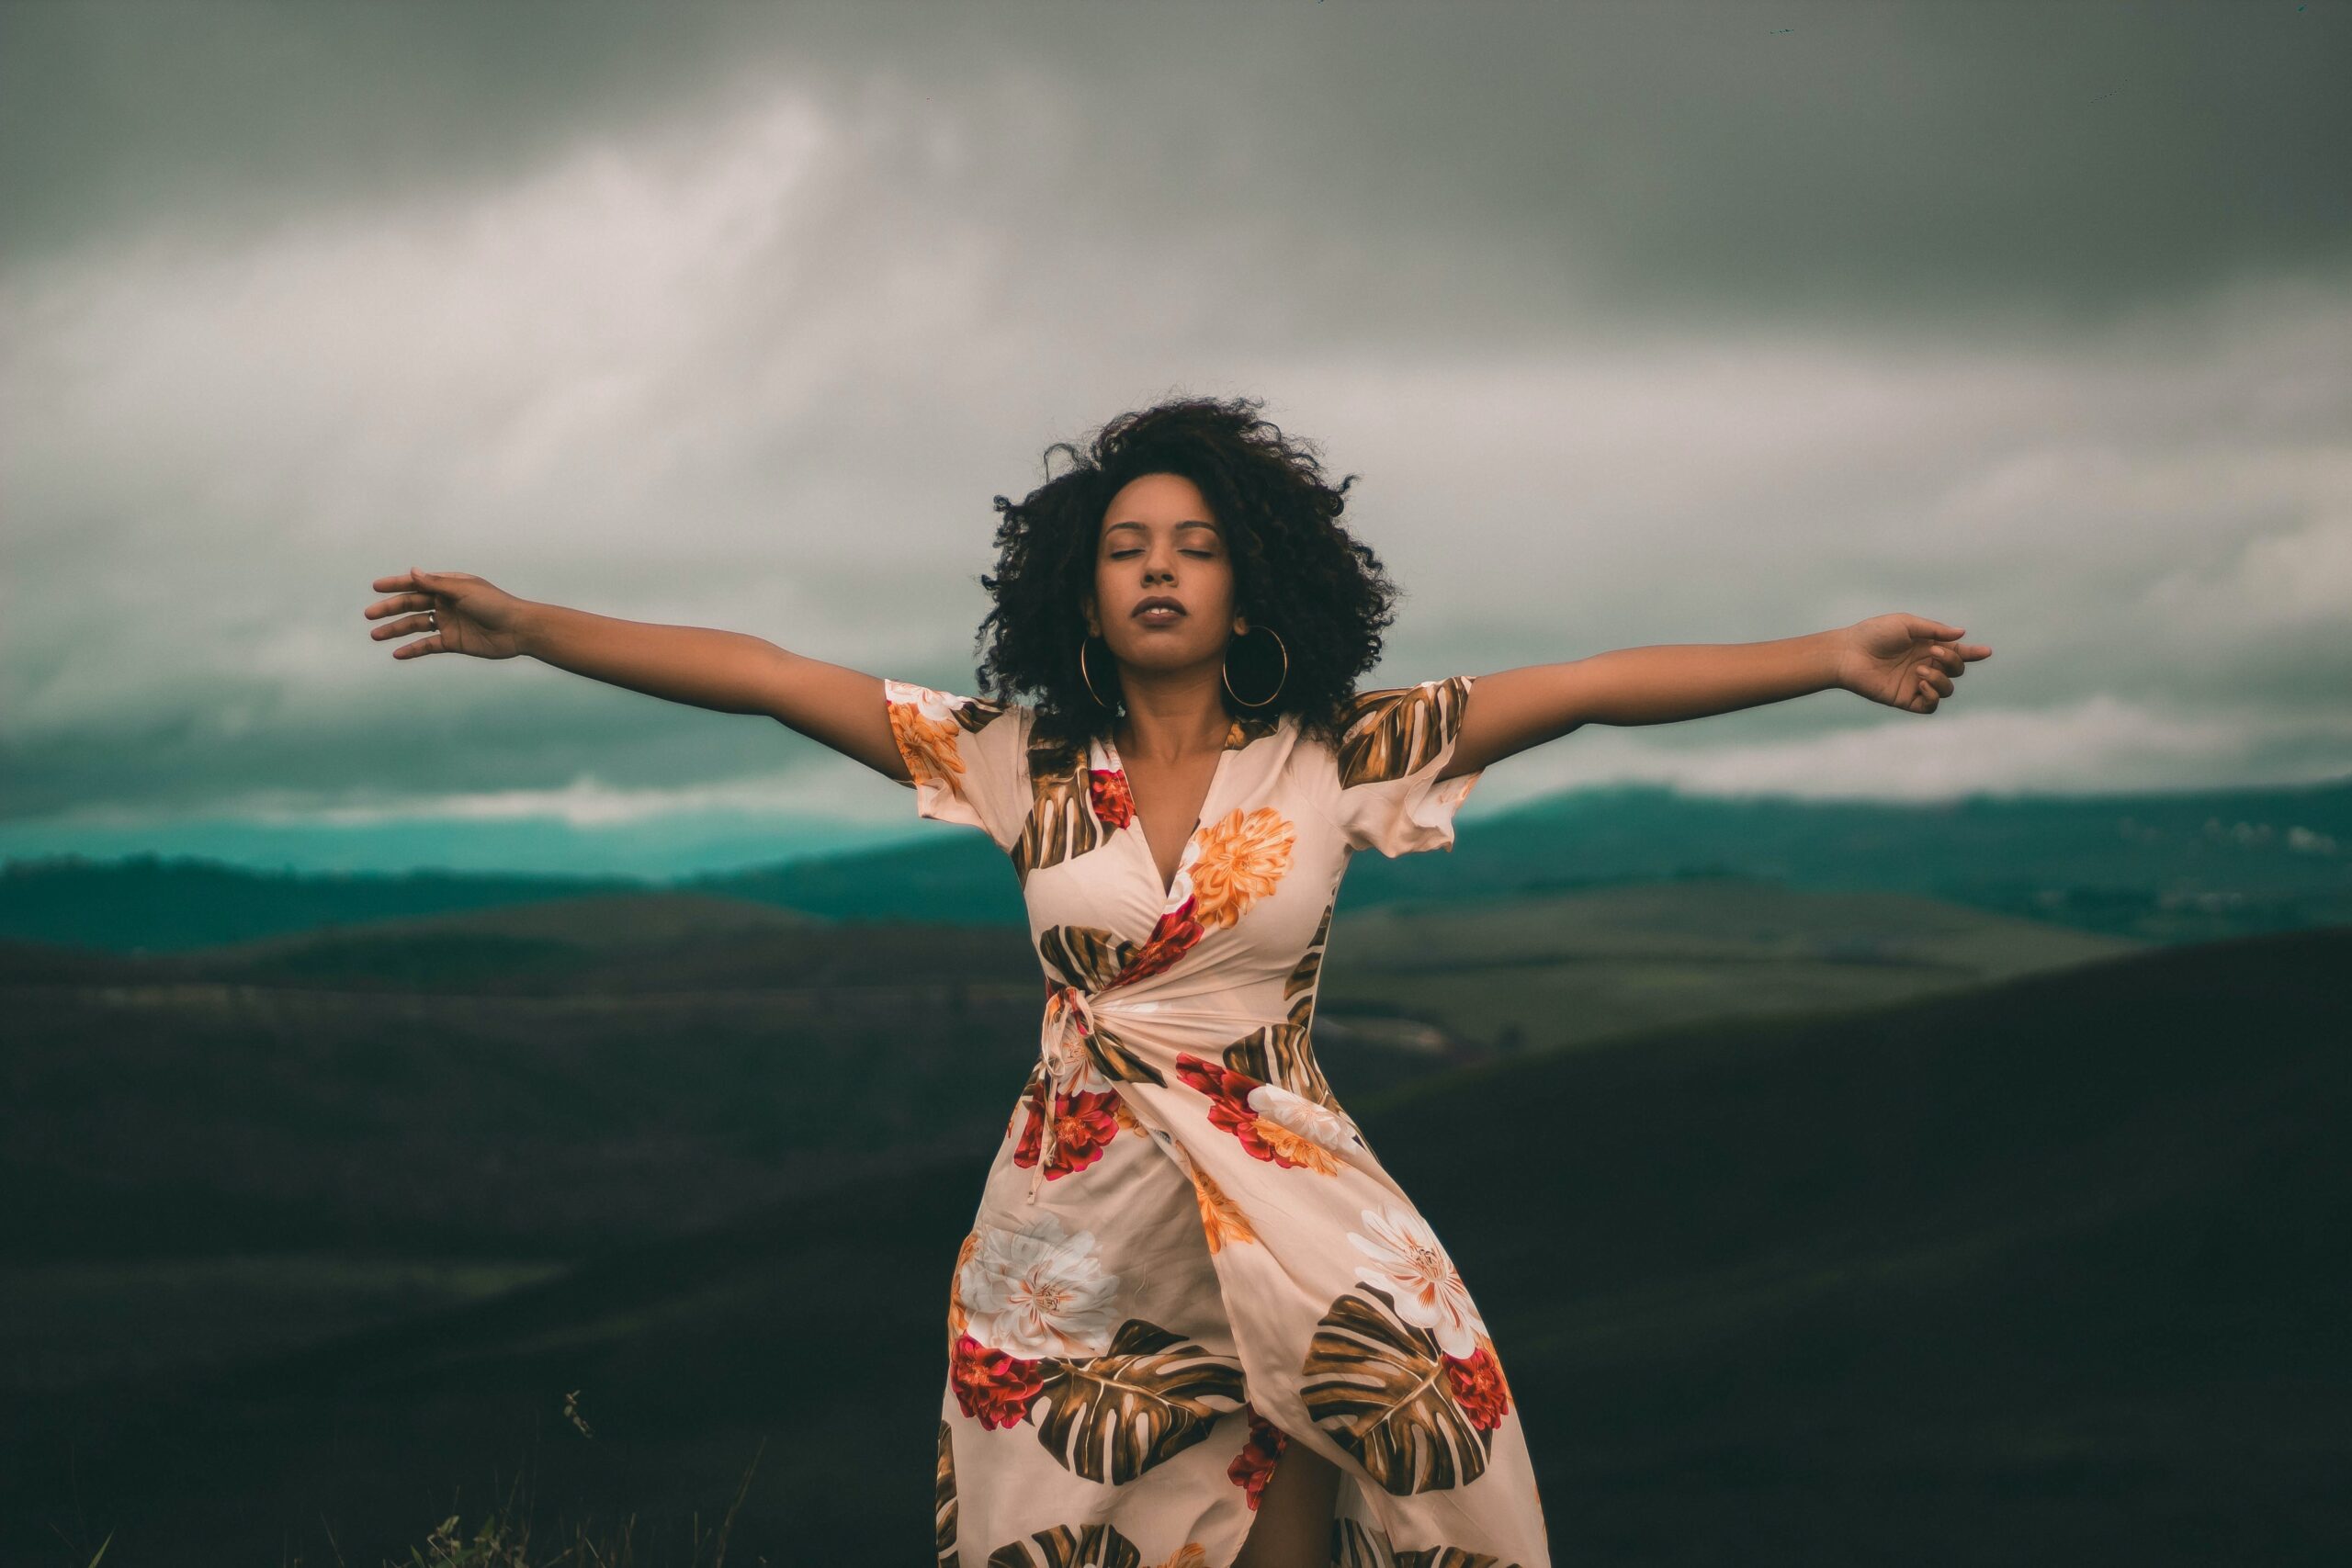 Image of a Black woman expressing a feeling of relief with arms spread wide, eyes closed, in floral dress in the mountains.